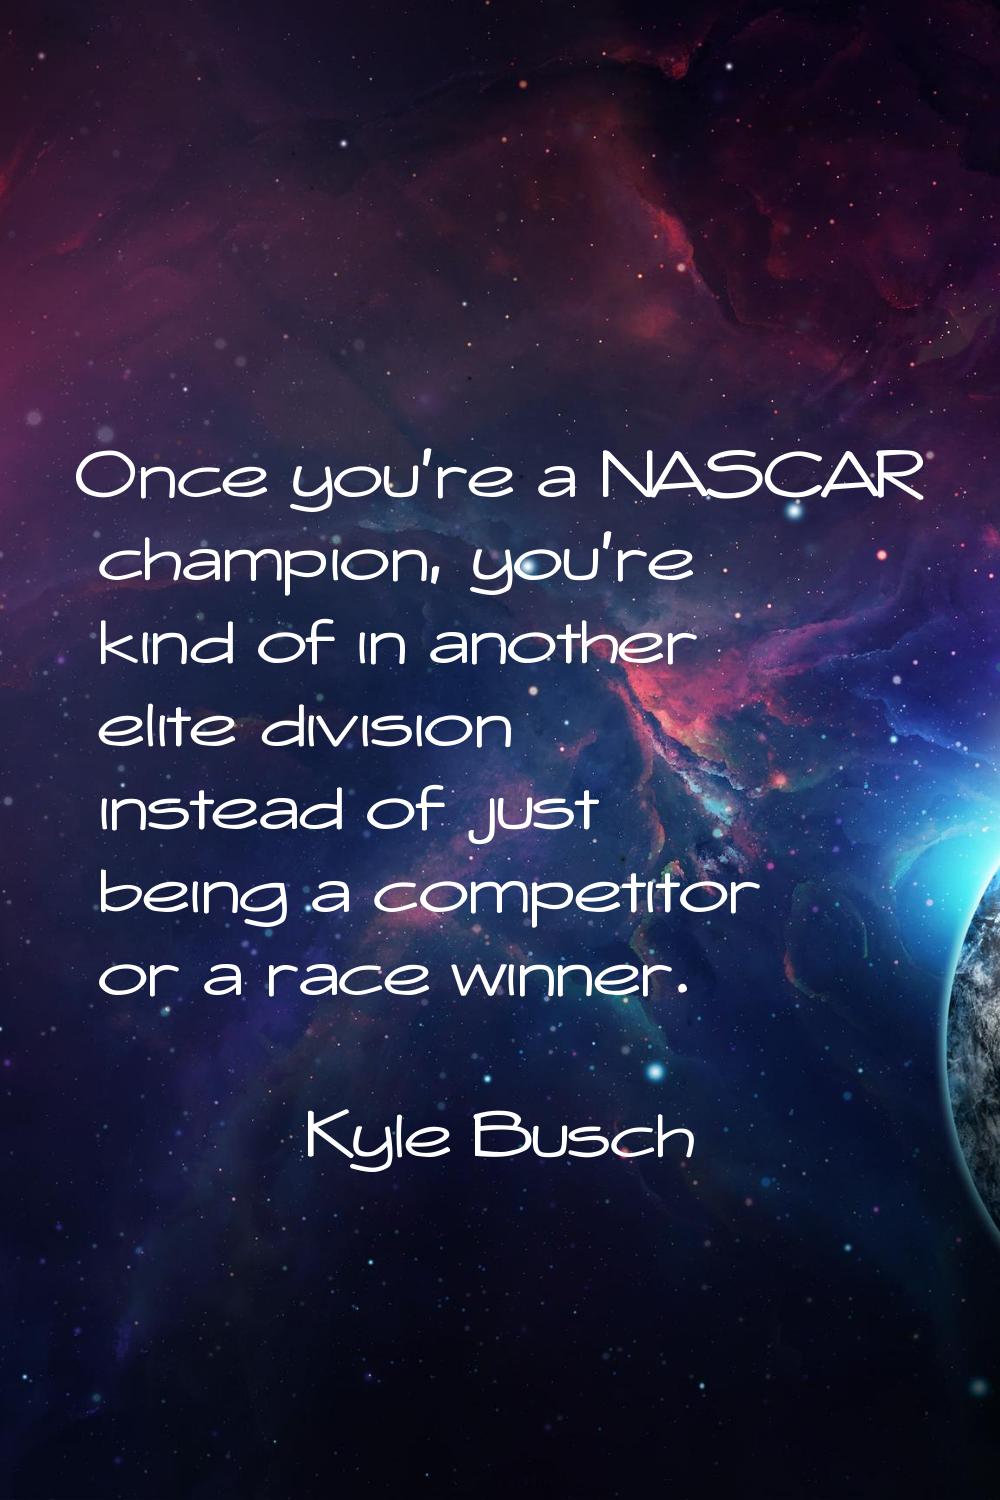 Once you're a NASCAR champion, you're kind of in another elite division instead of just being a com